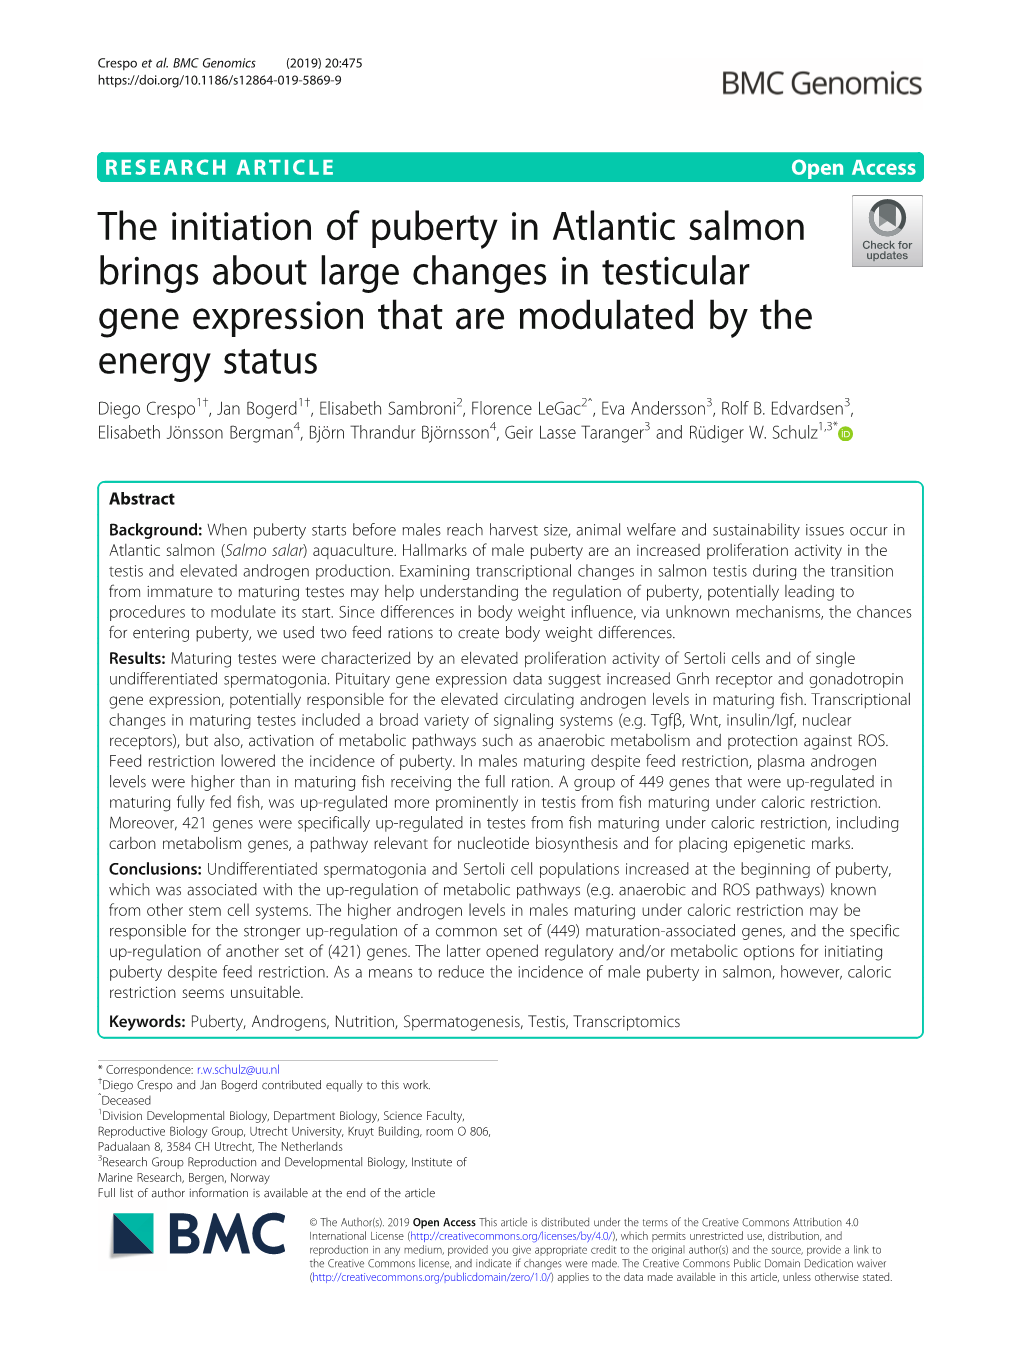 The Initiation of Puberty in Atlantic Salmon Brings About Large Changes